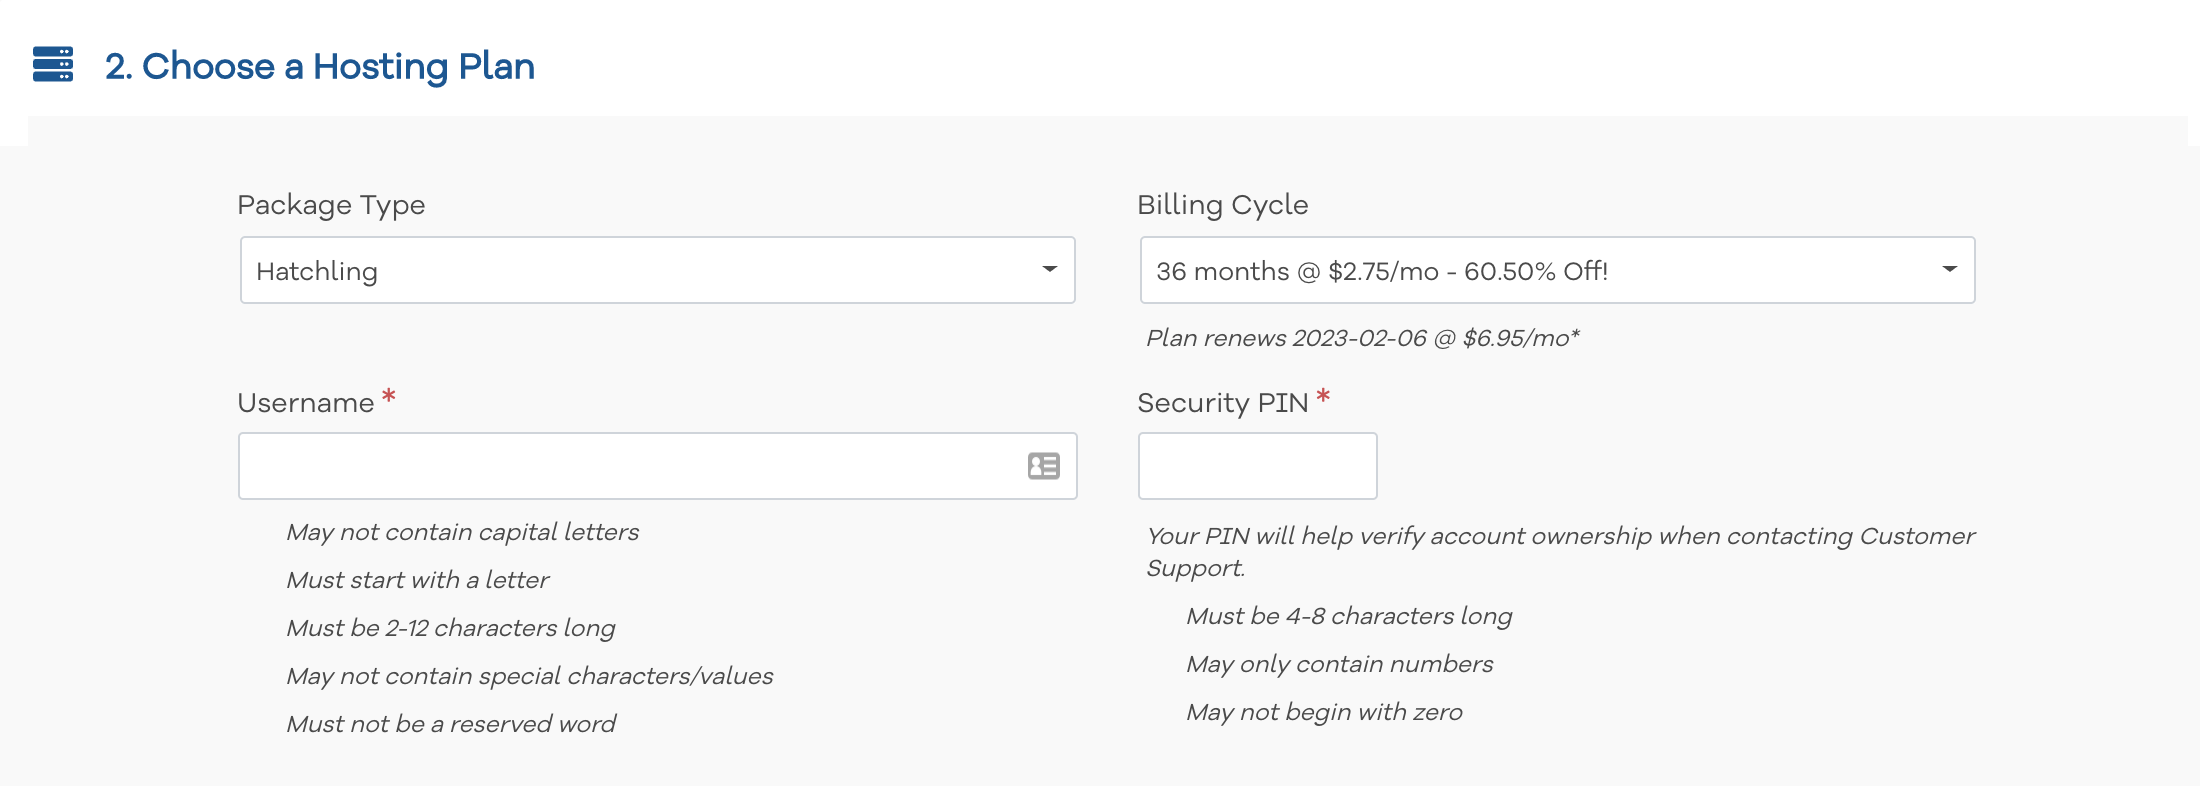 Confirm Your Hosting Plan